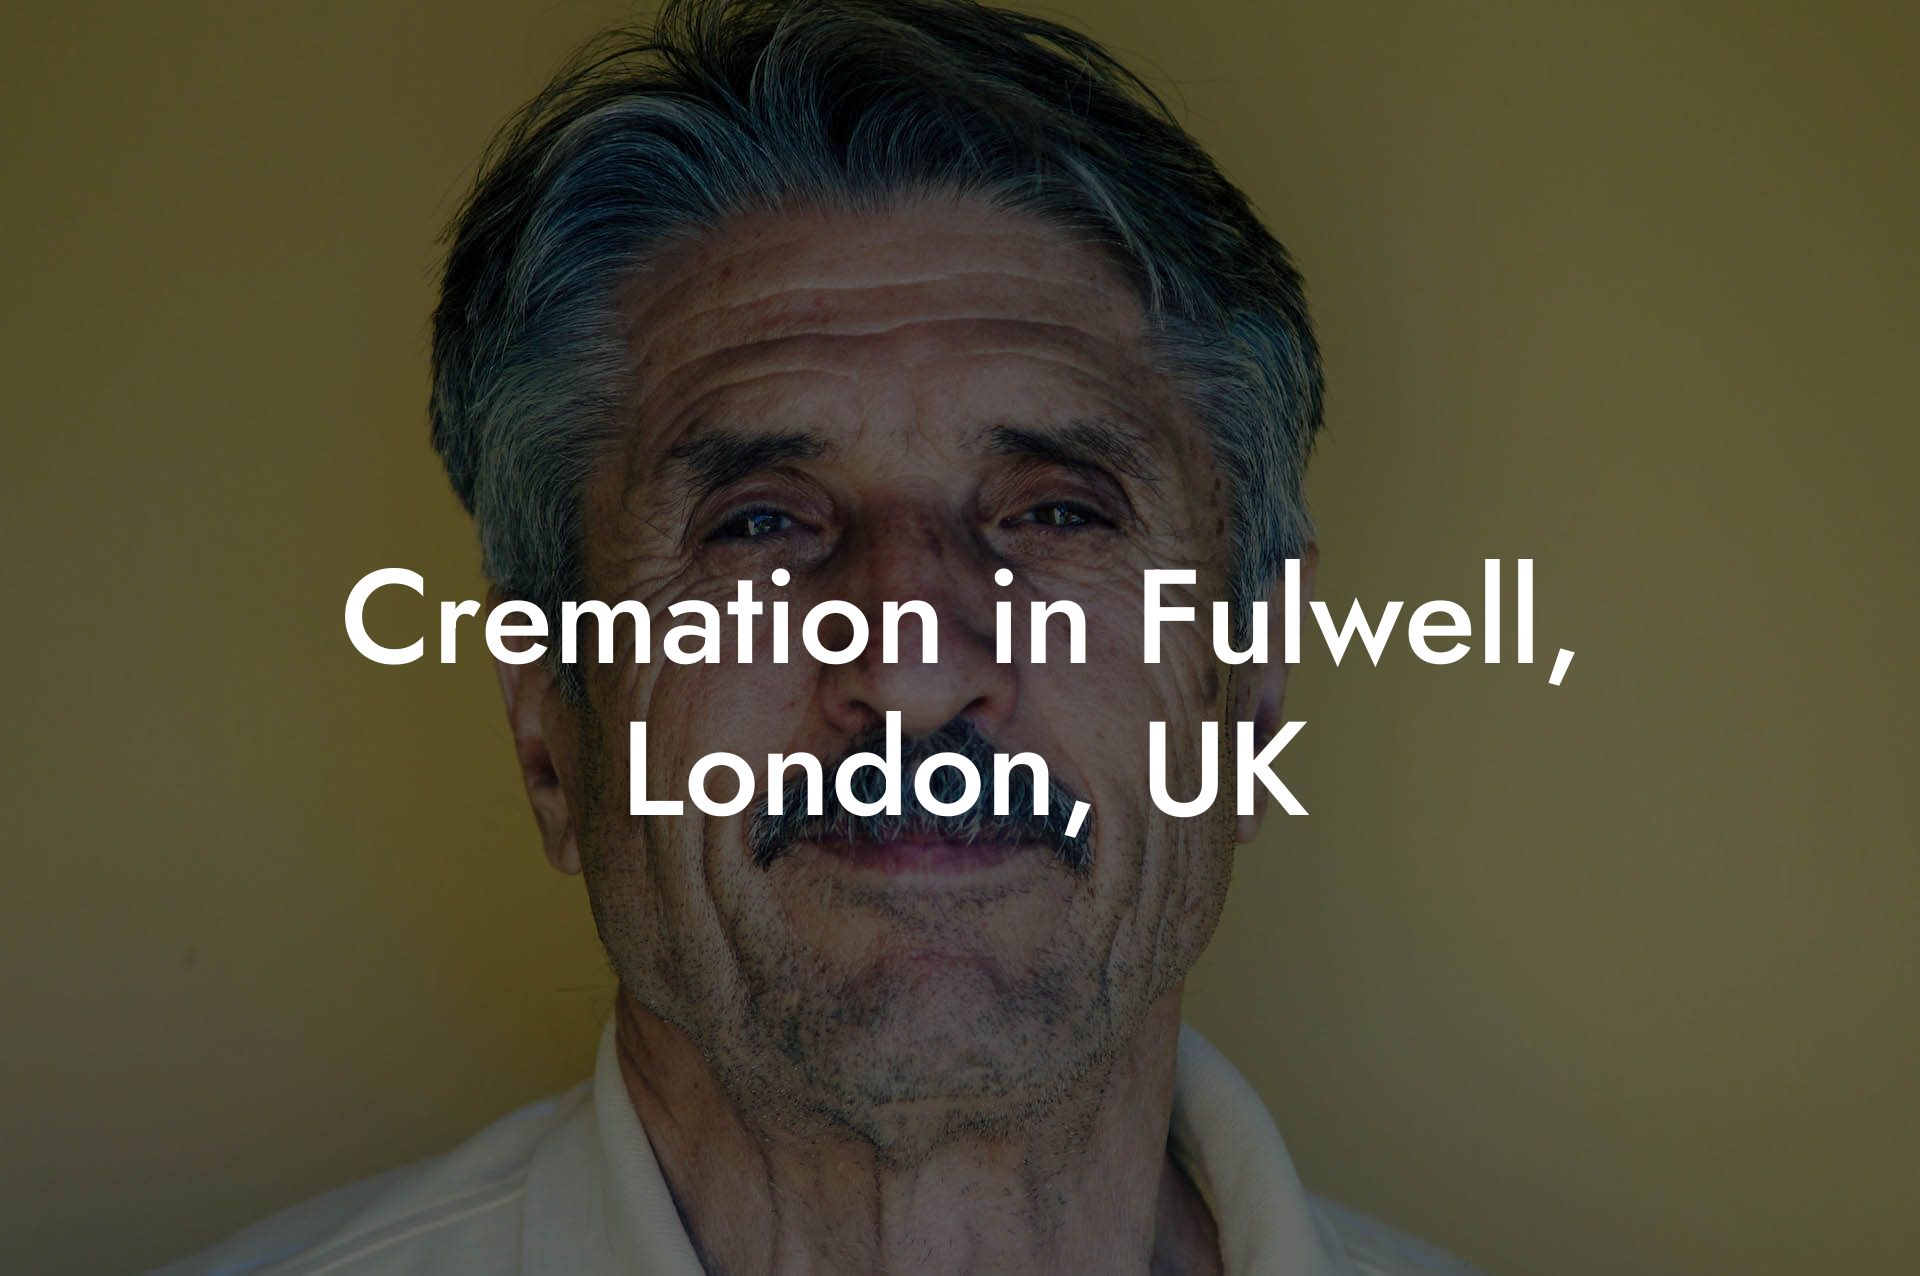 Cremation in Fulwell, London, UK